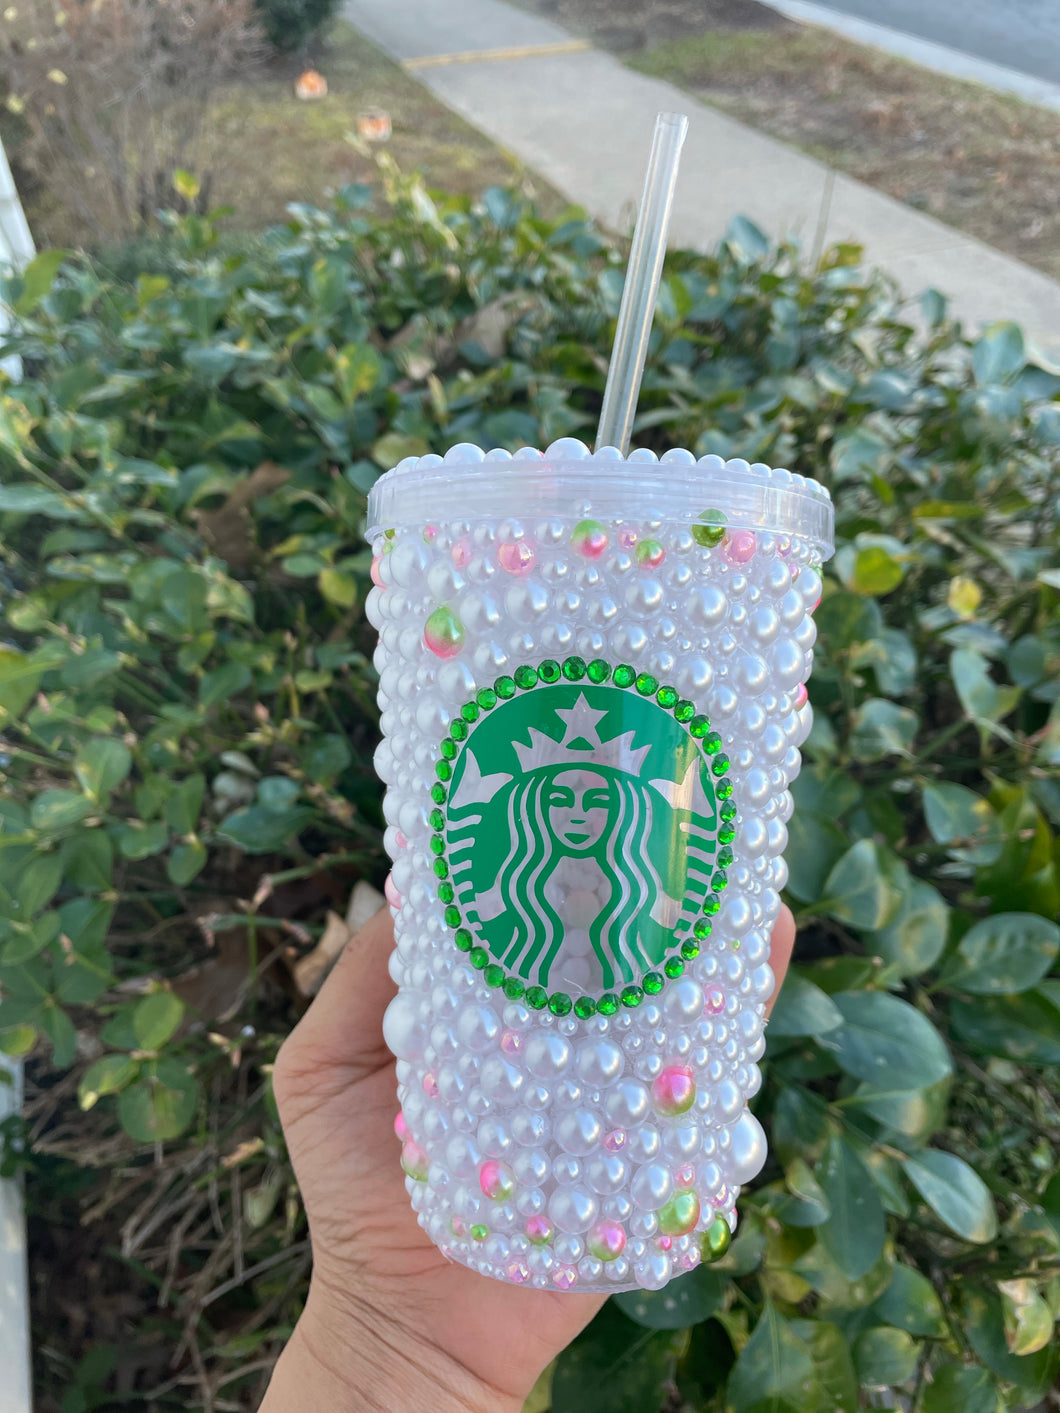 Pearl Starbucks Inspired Cup with any color accent